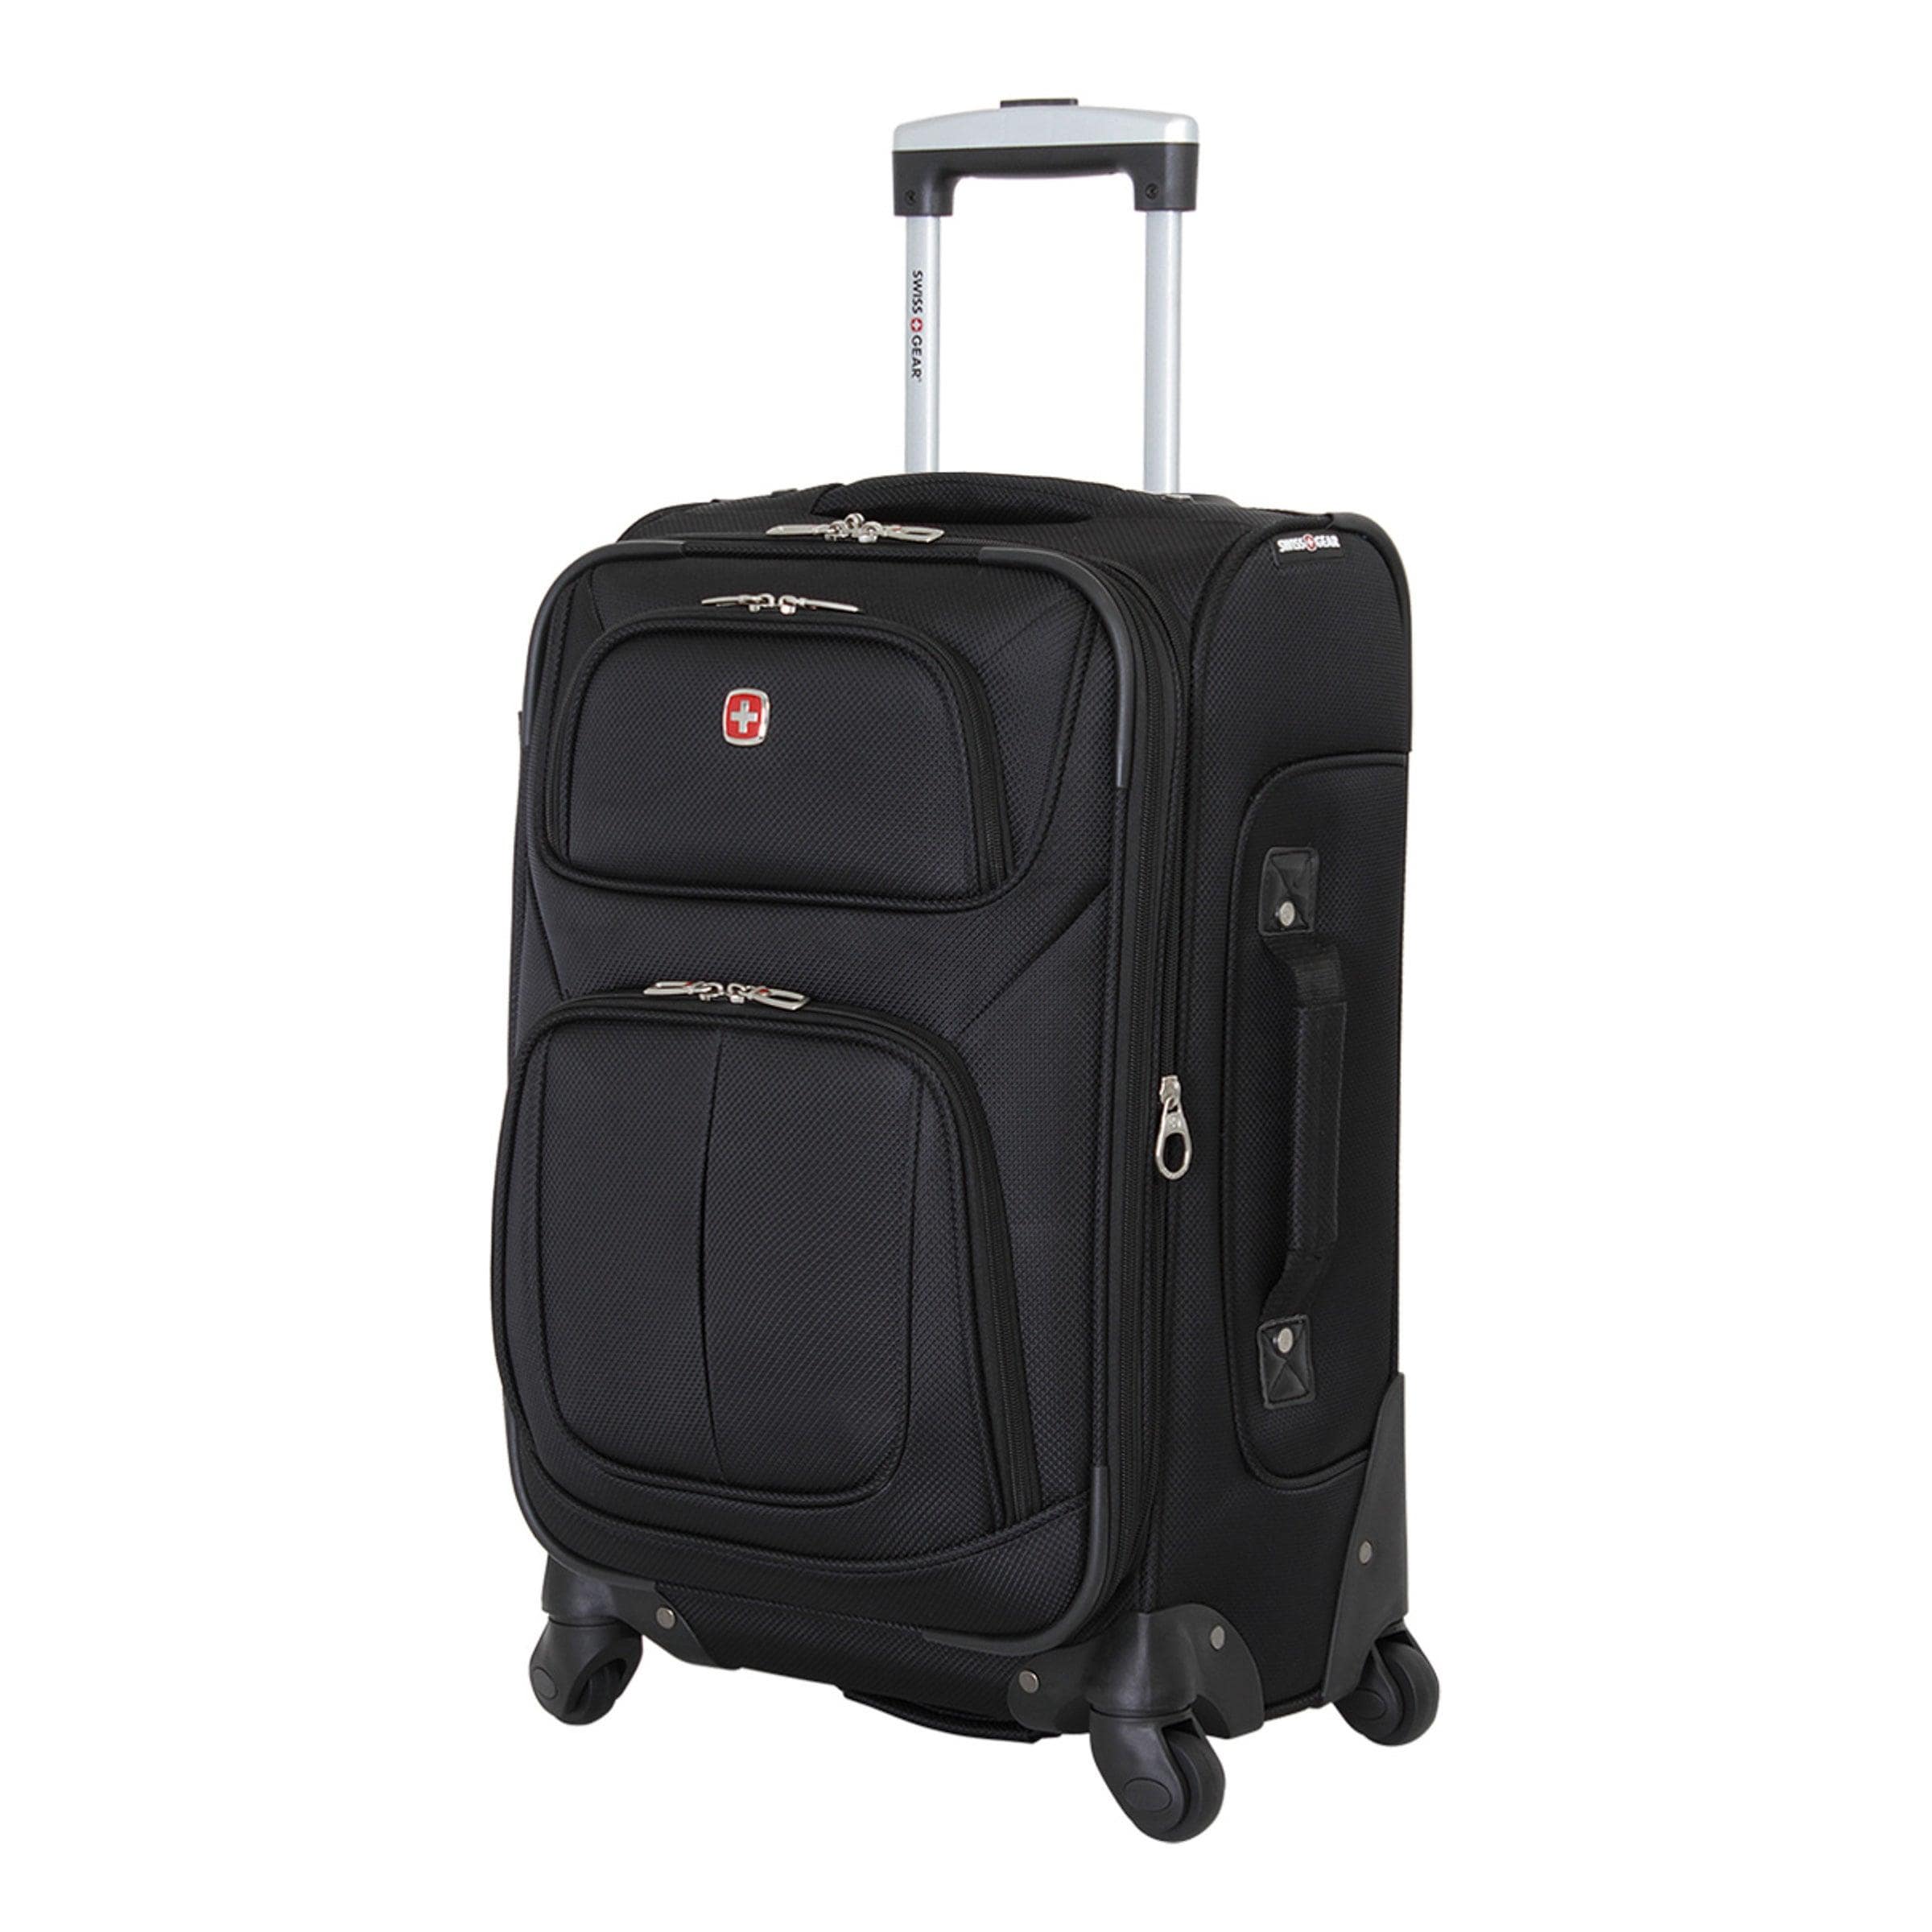 10 Best Luggage Bags for International Travel